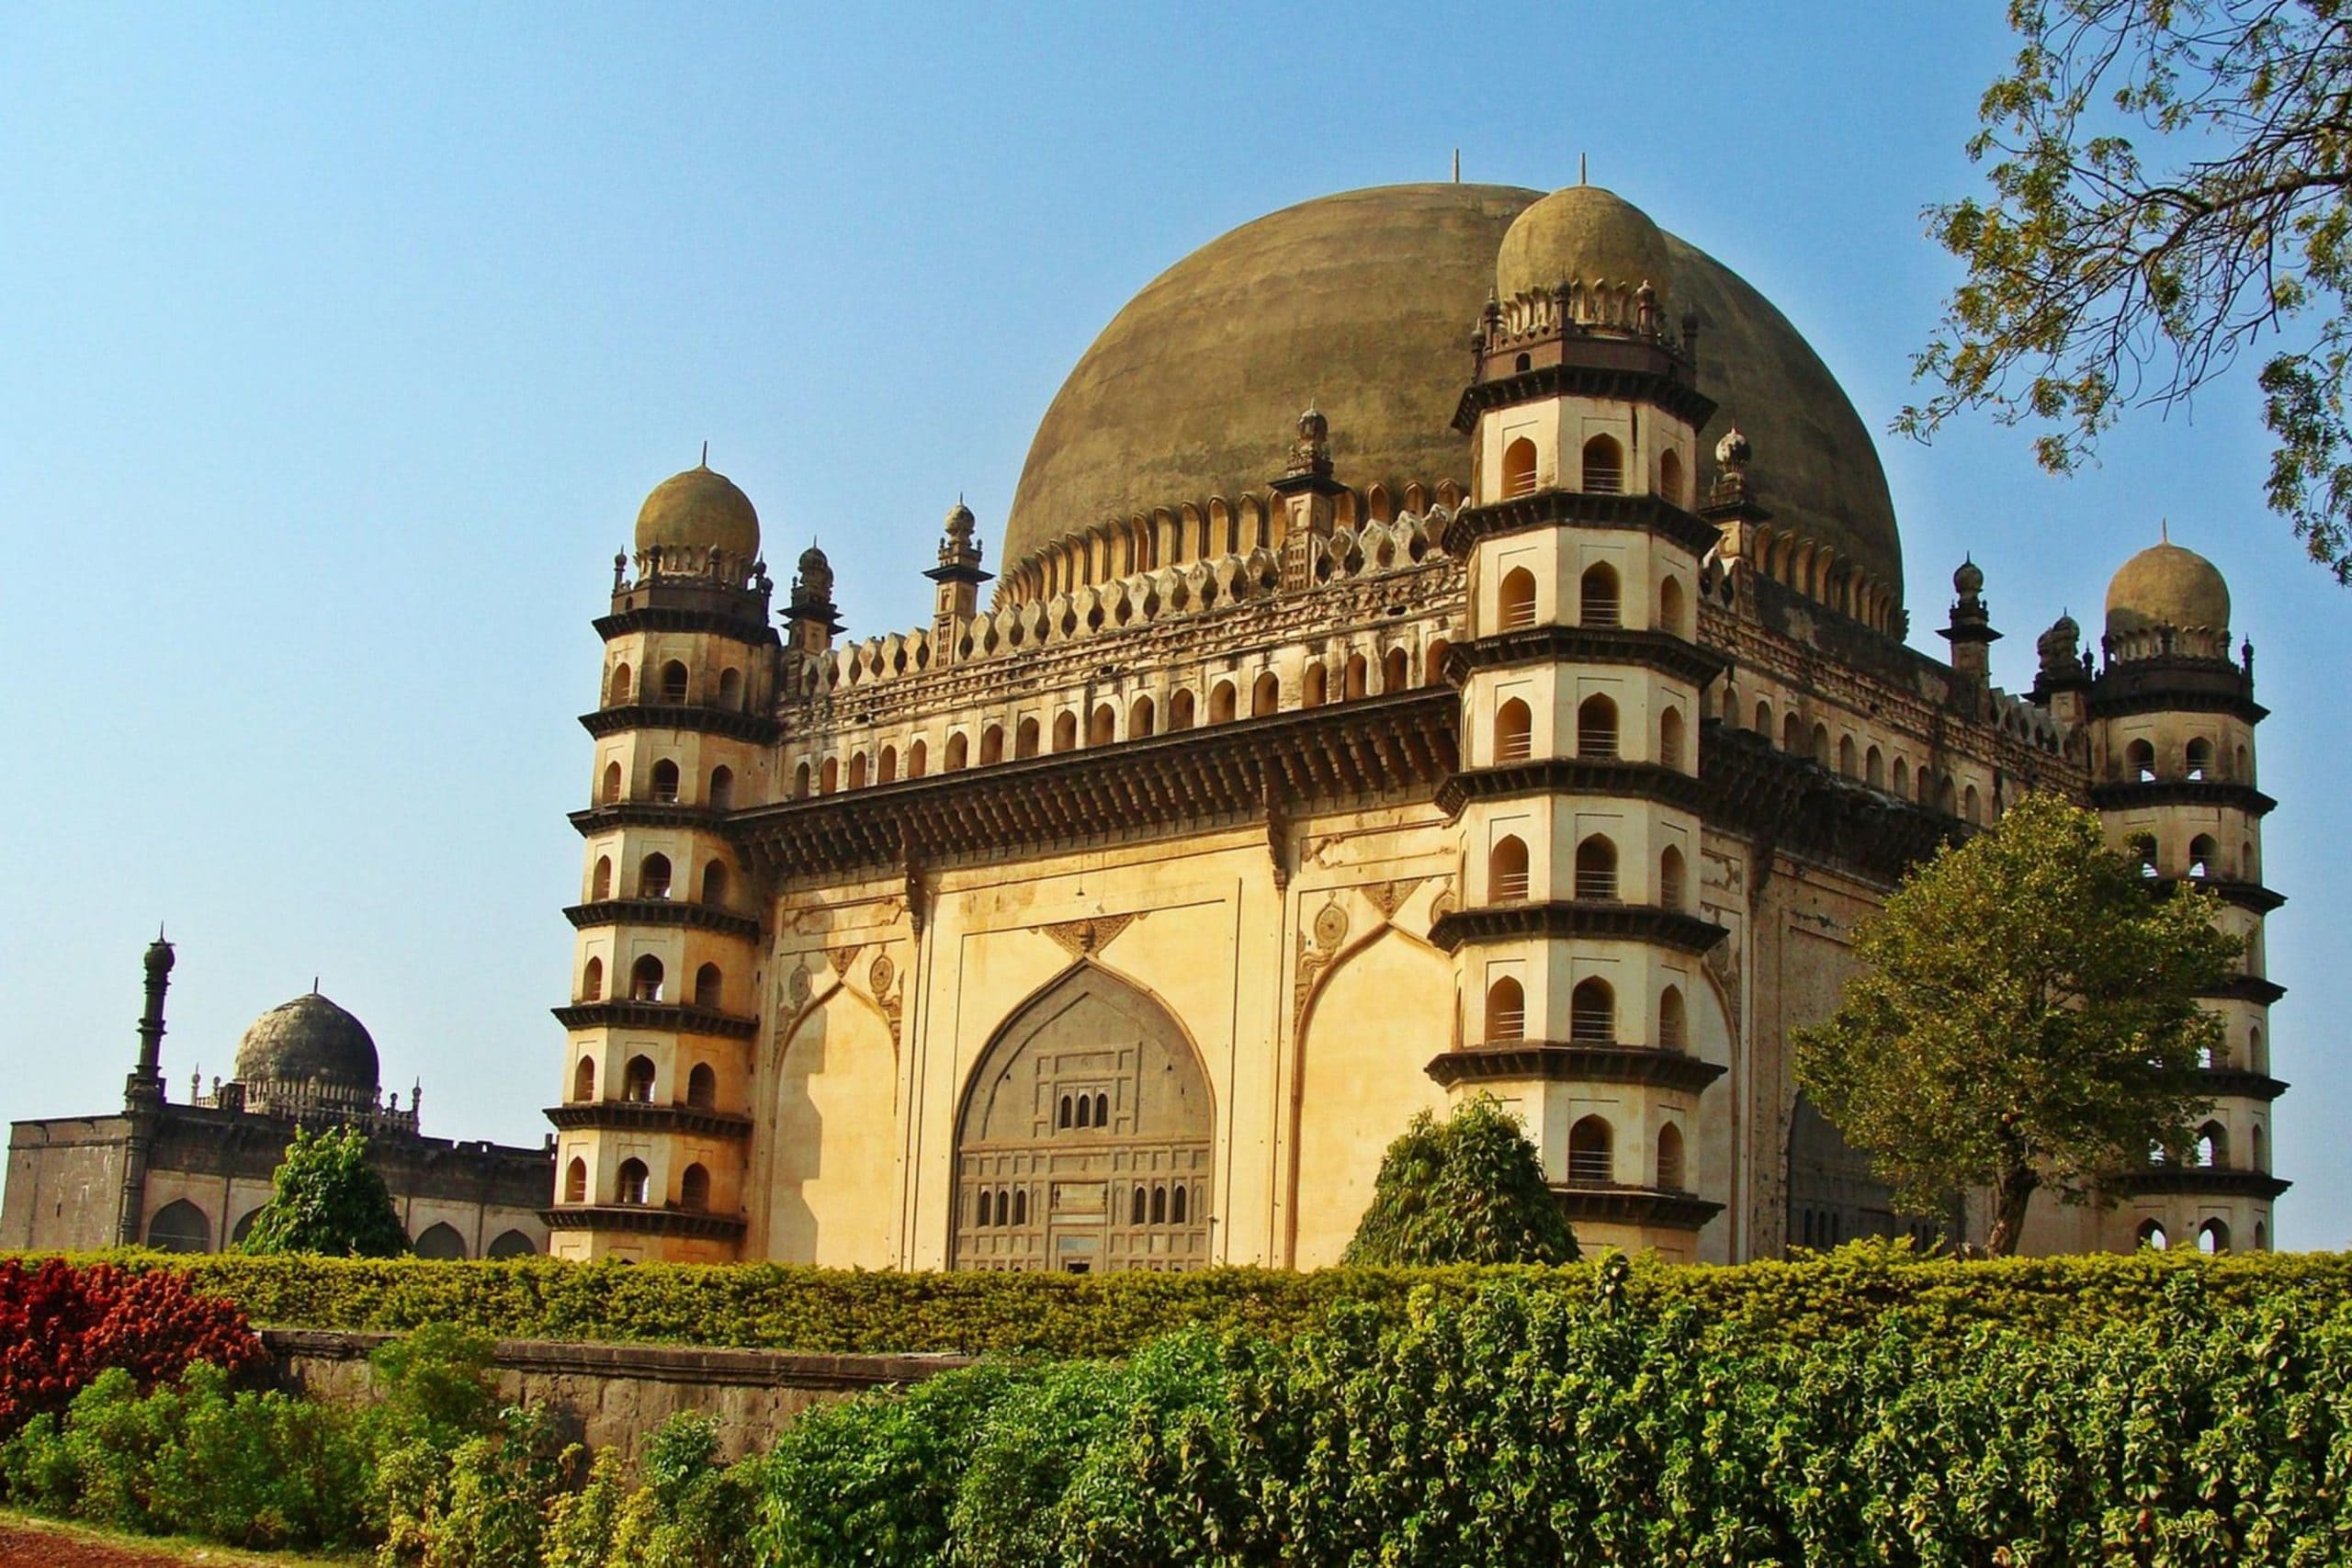 famous dome structures